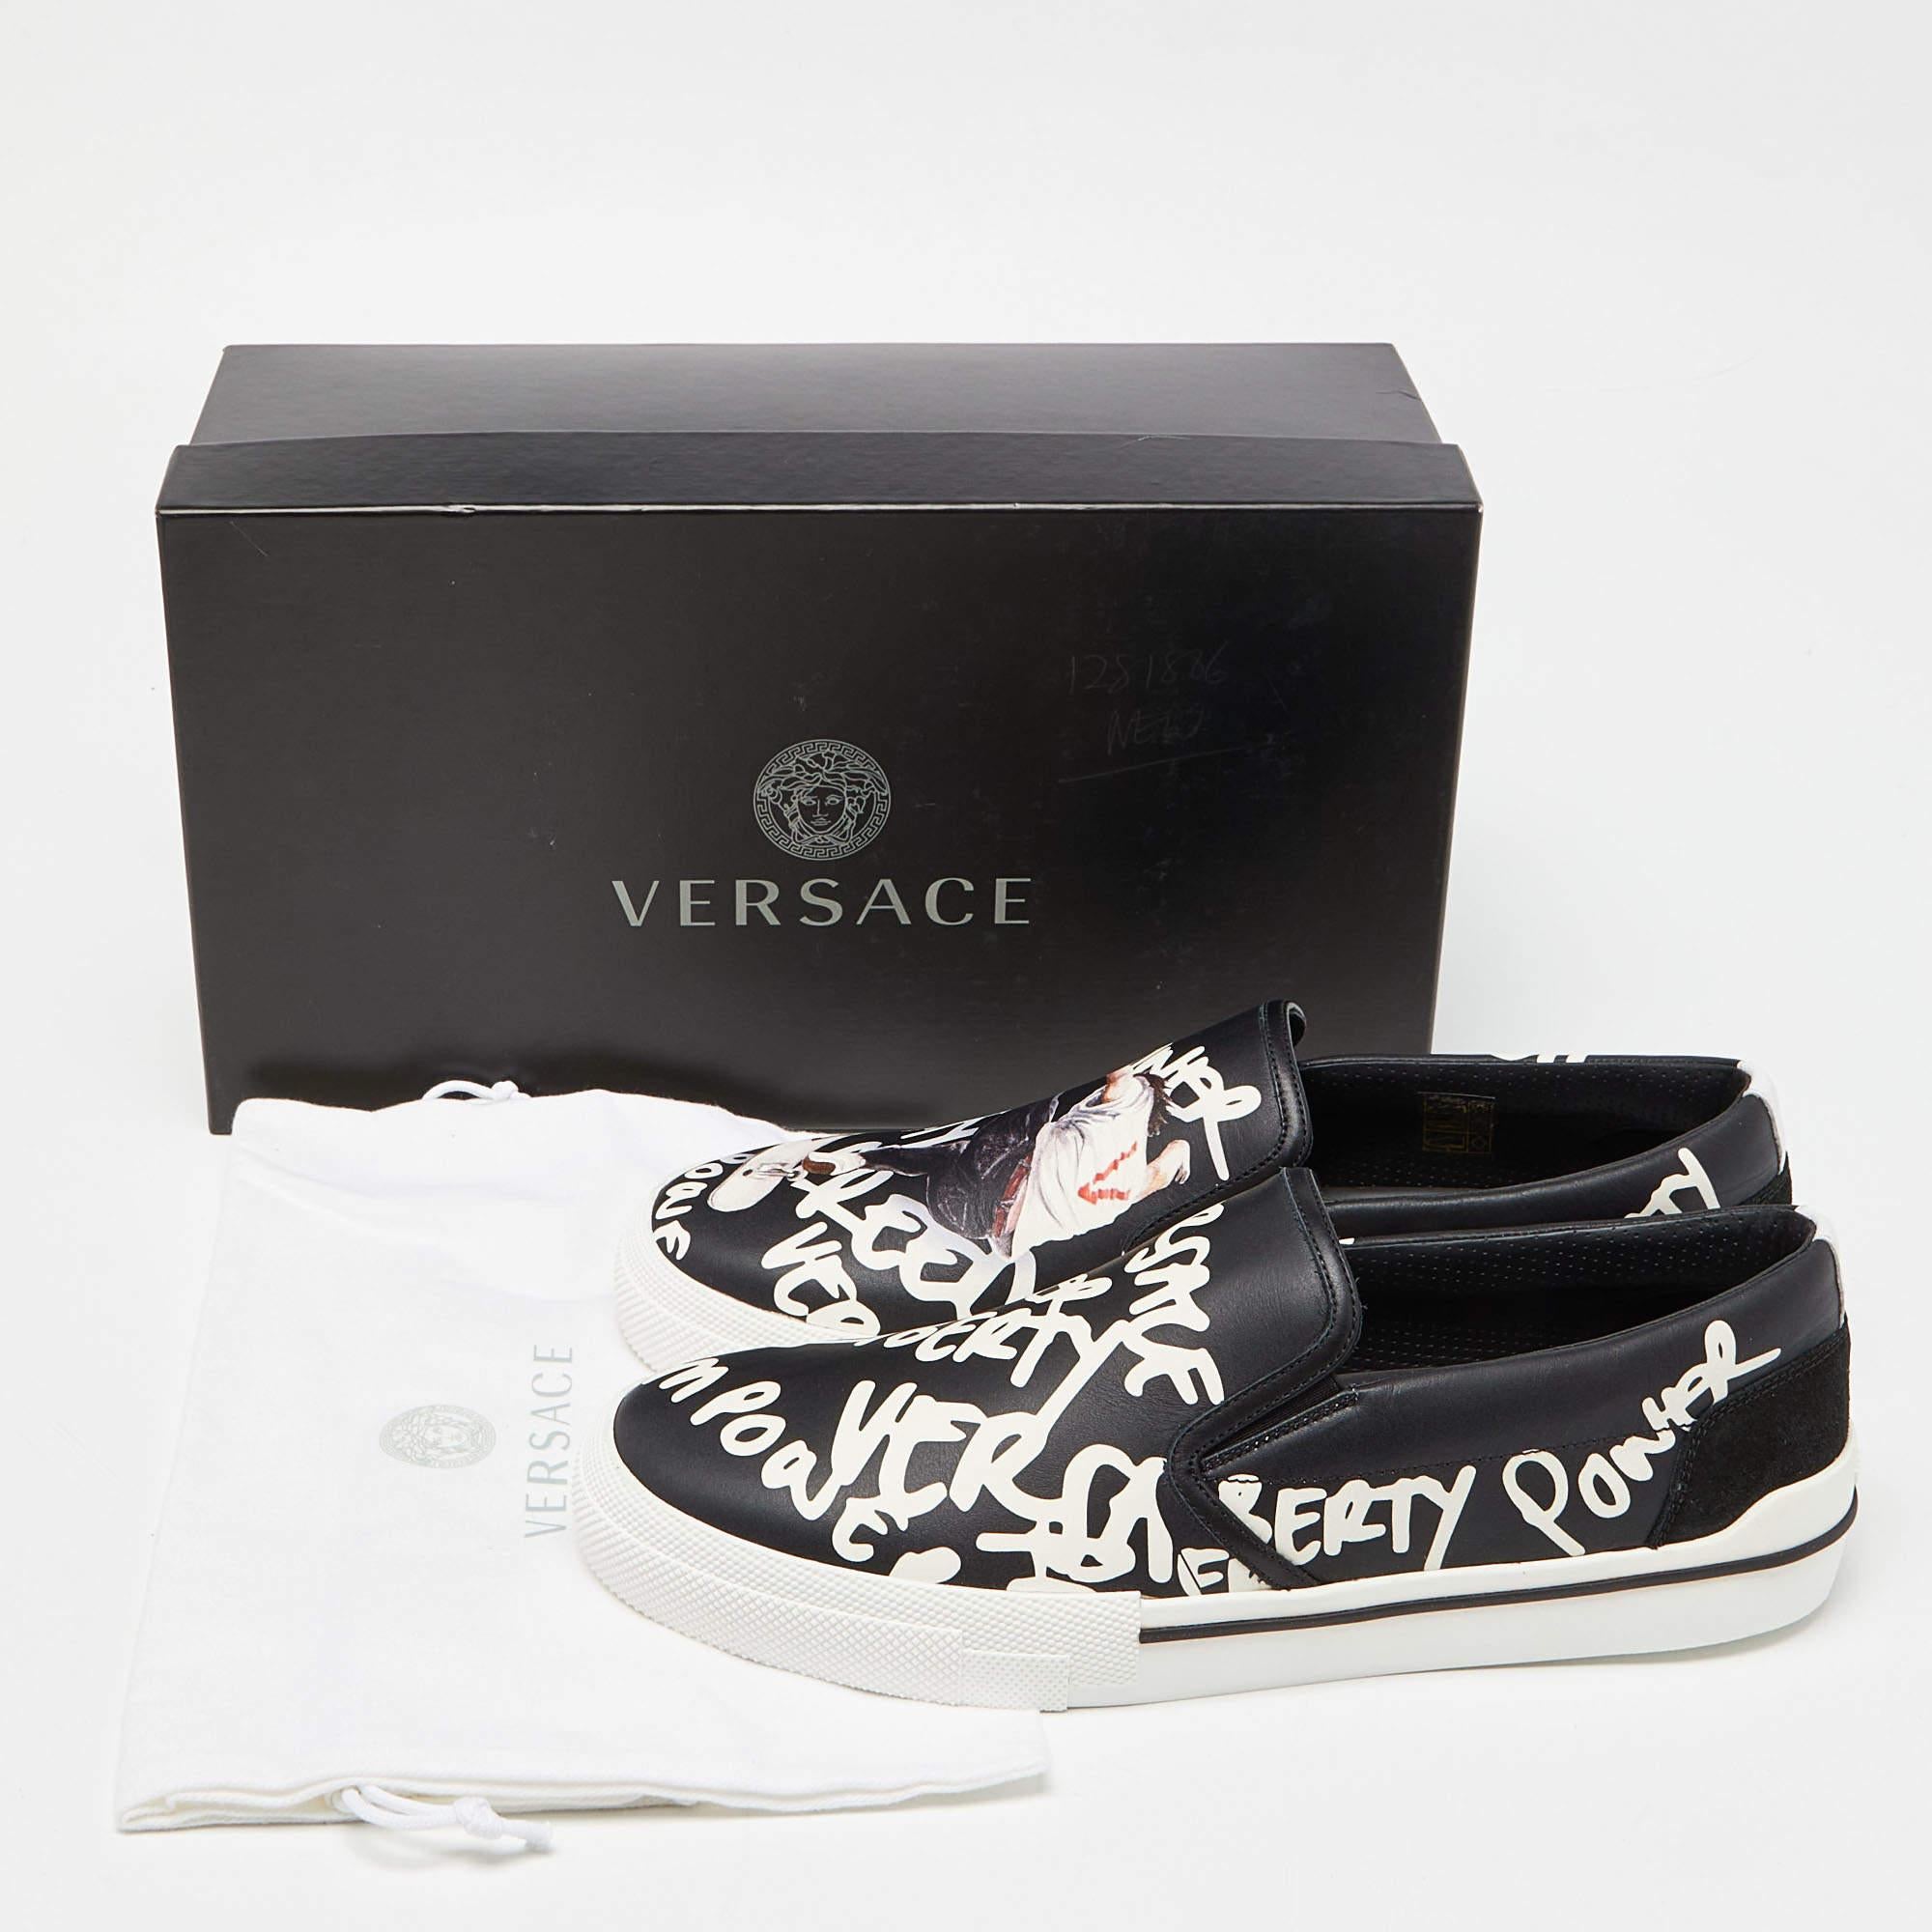 Versace Black/White Printed Leather Slip On Sneakers Size 43 4